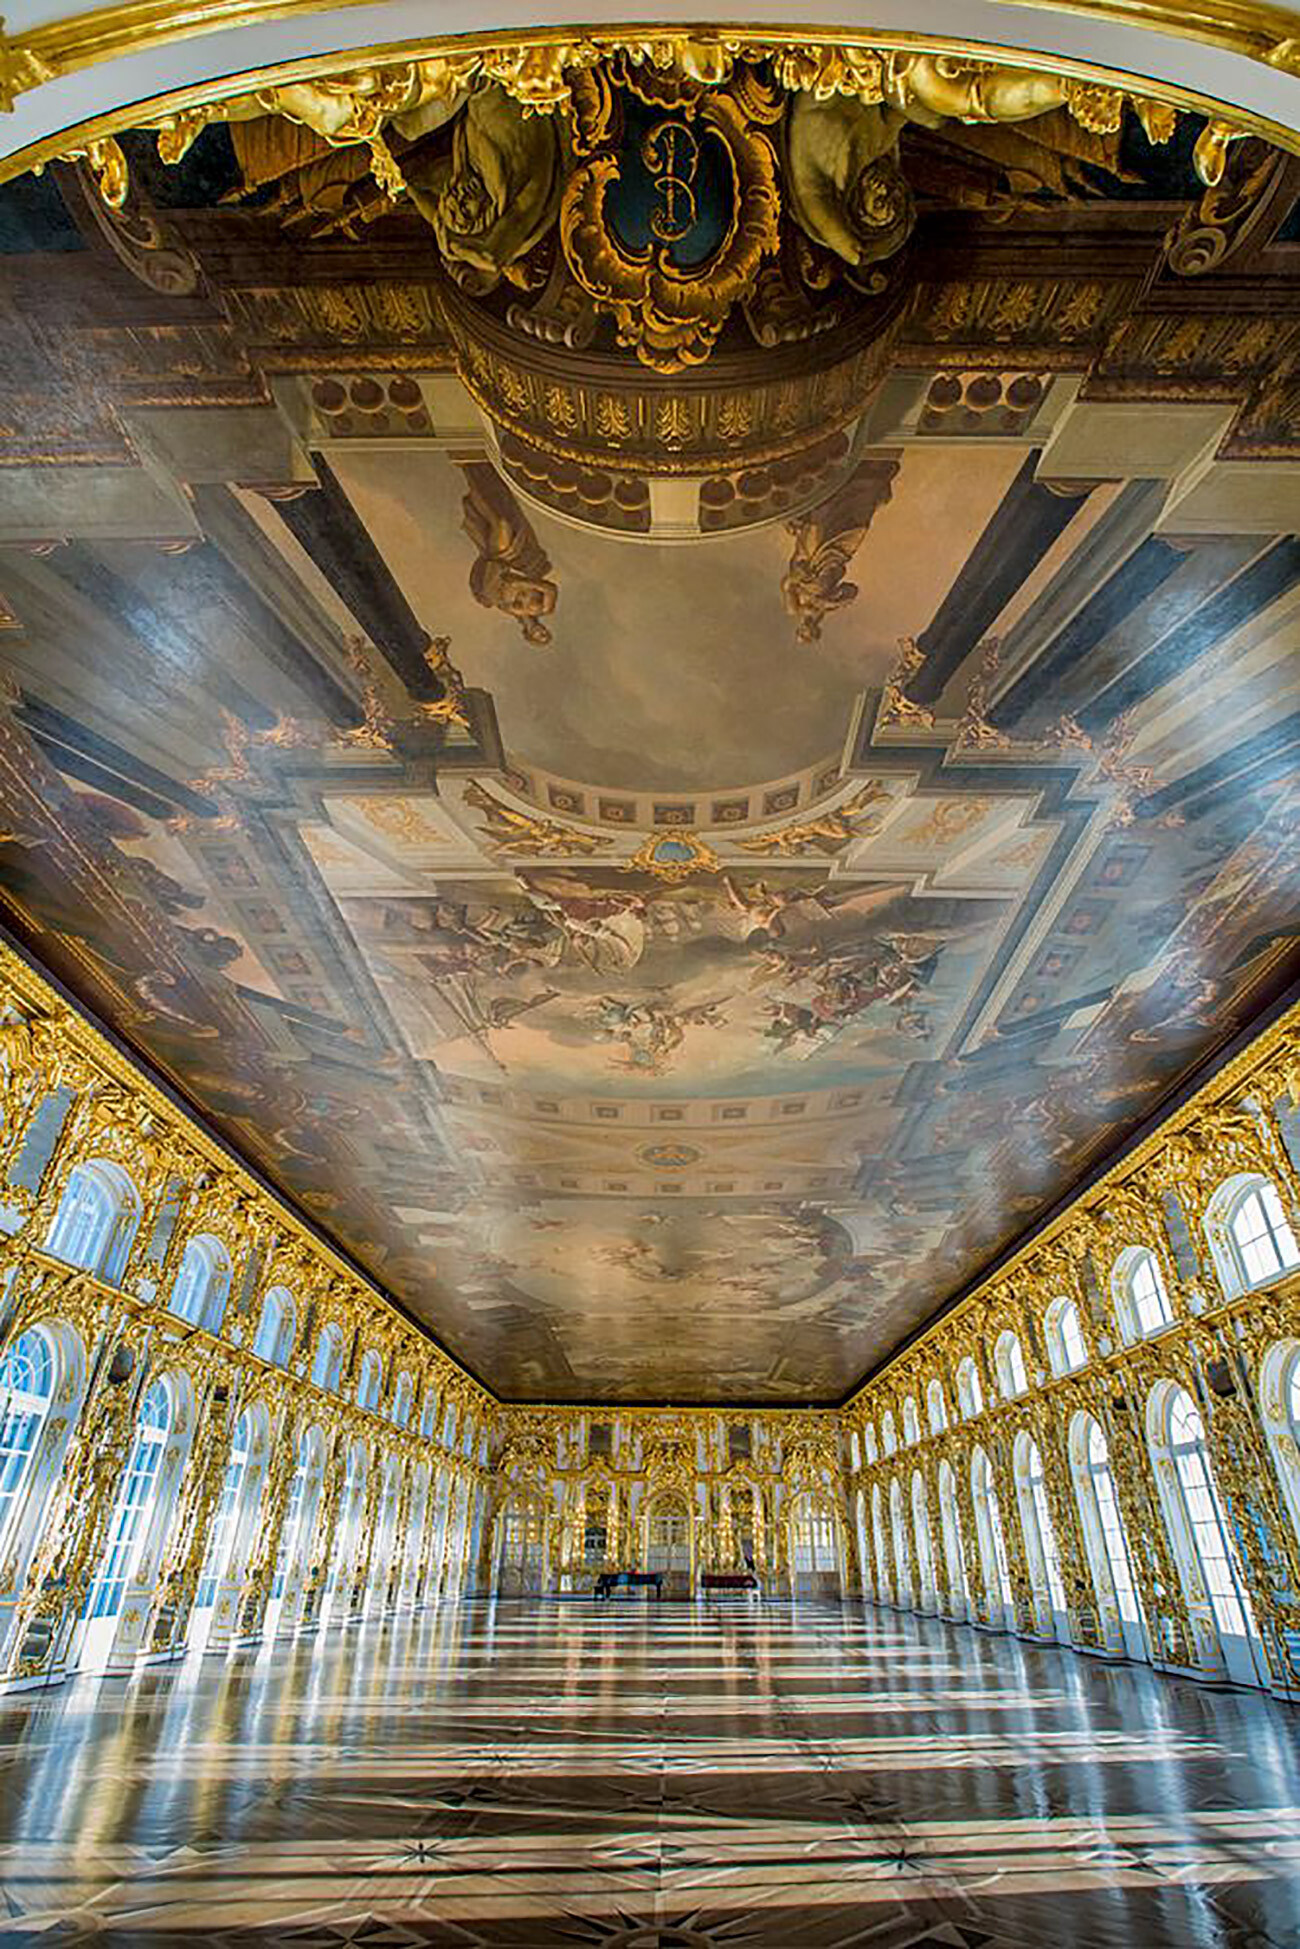 The Big Hall of the Catherine Palace